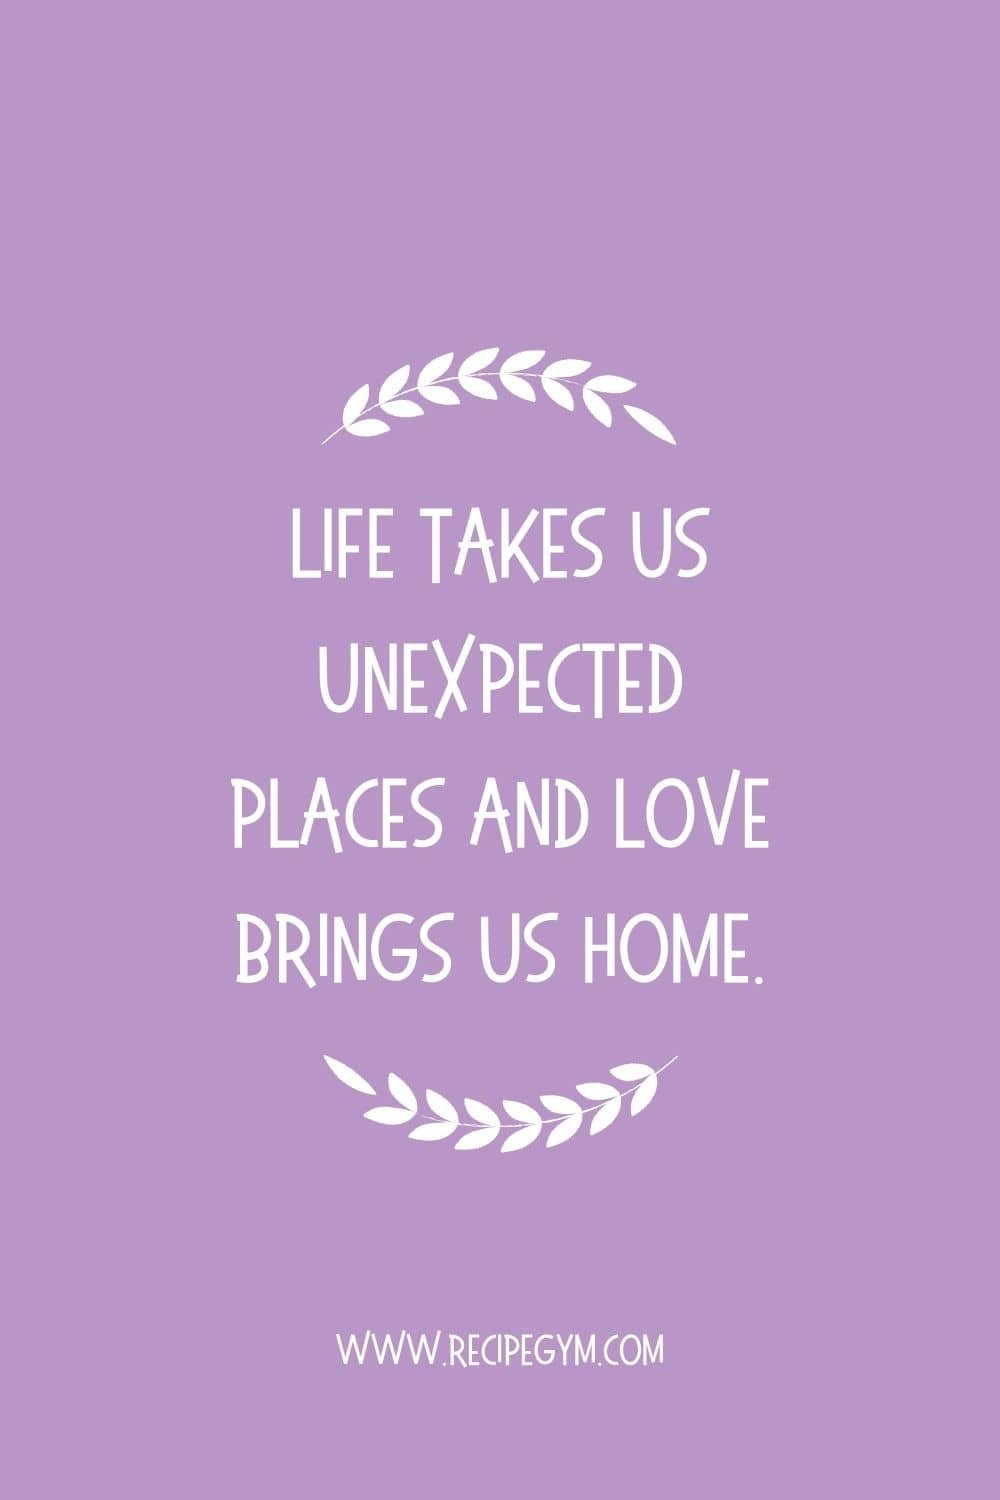 3Z Life takes us unexpected places and love brings us home